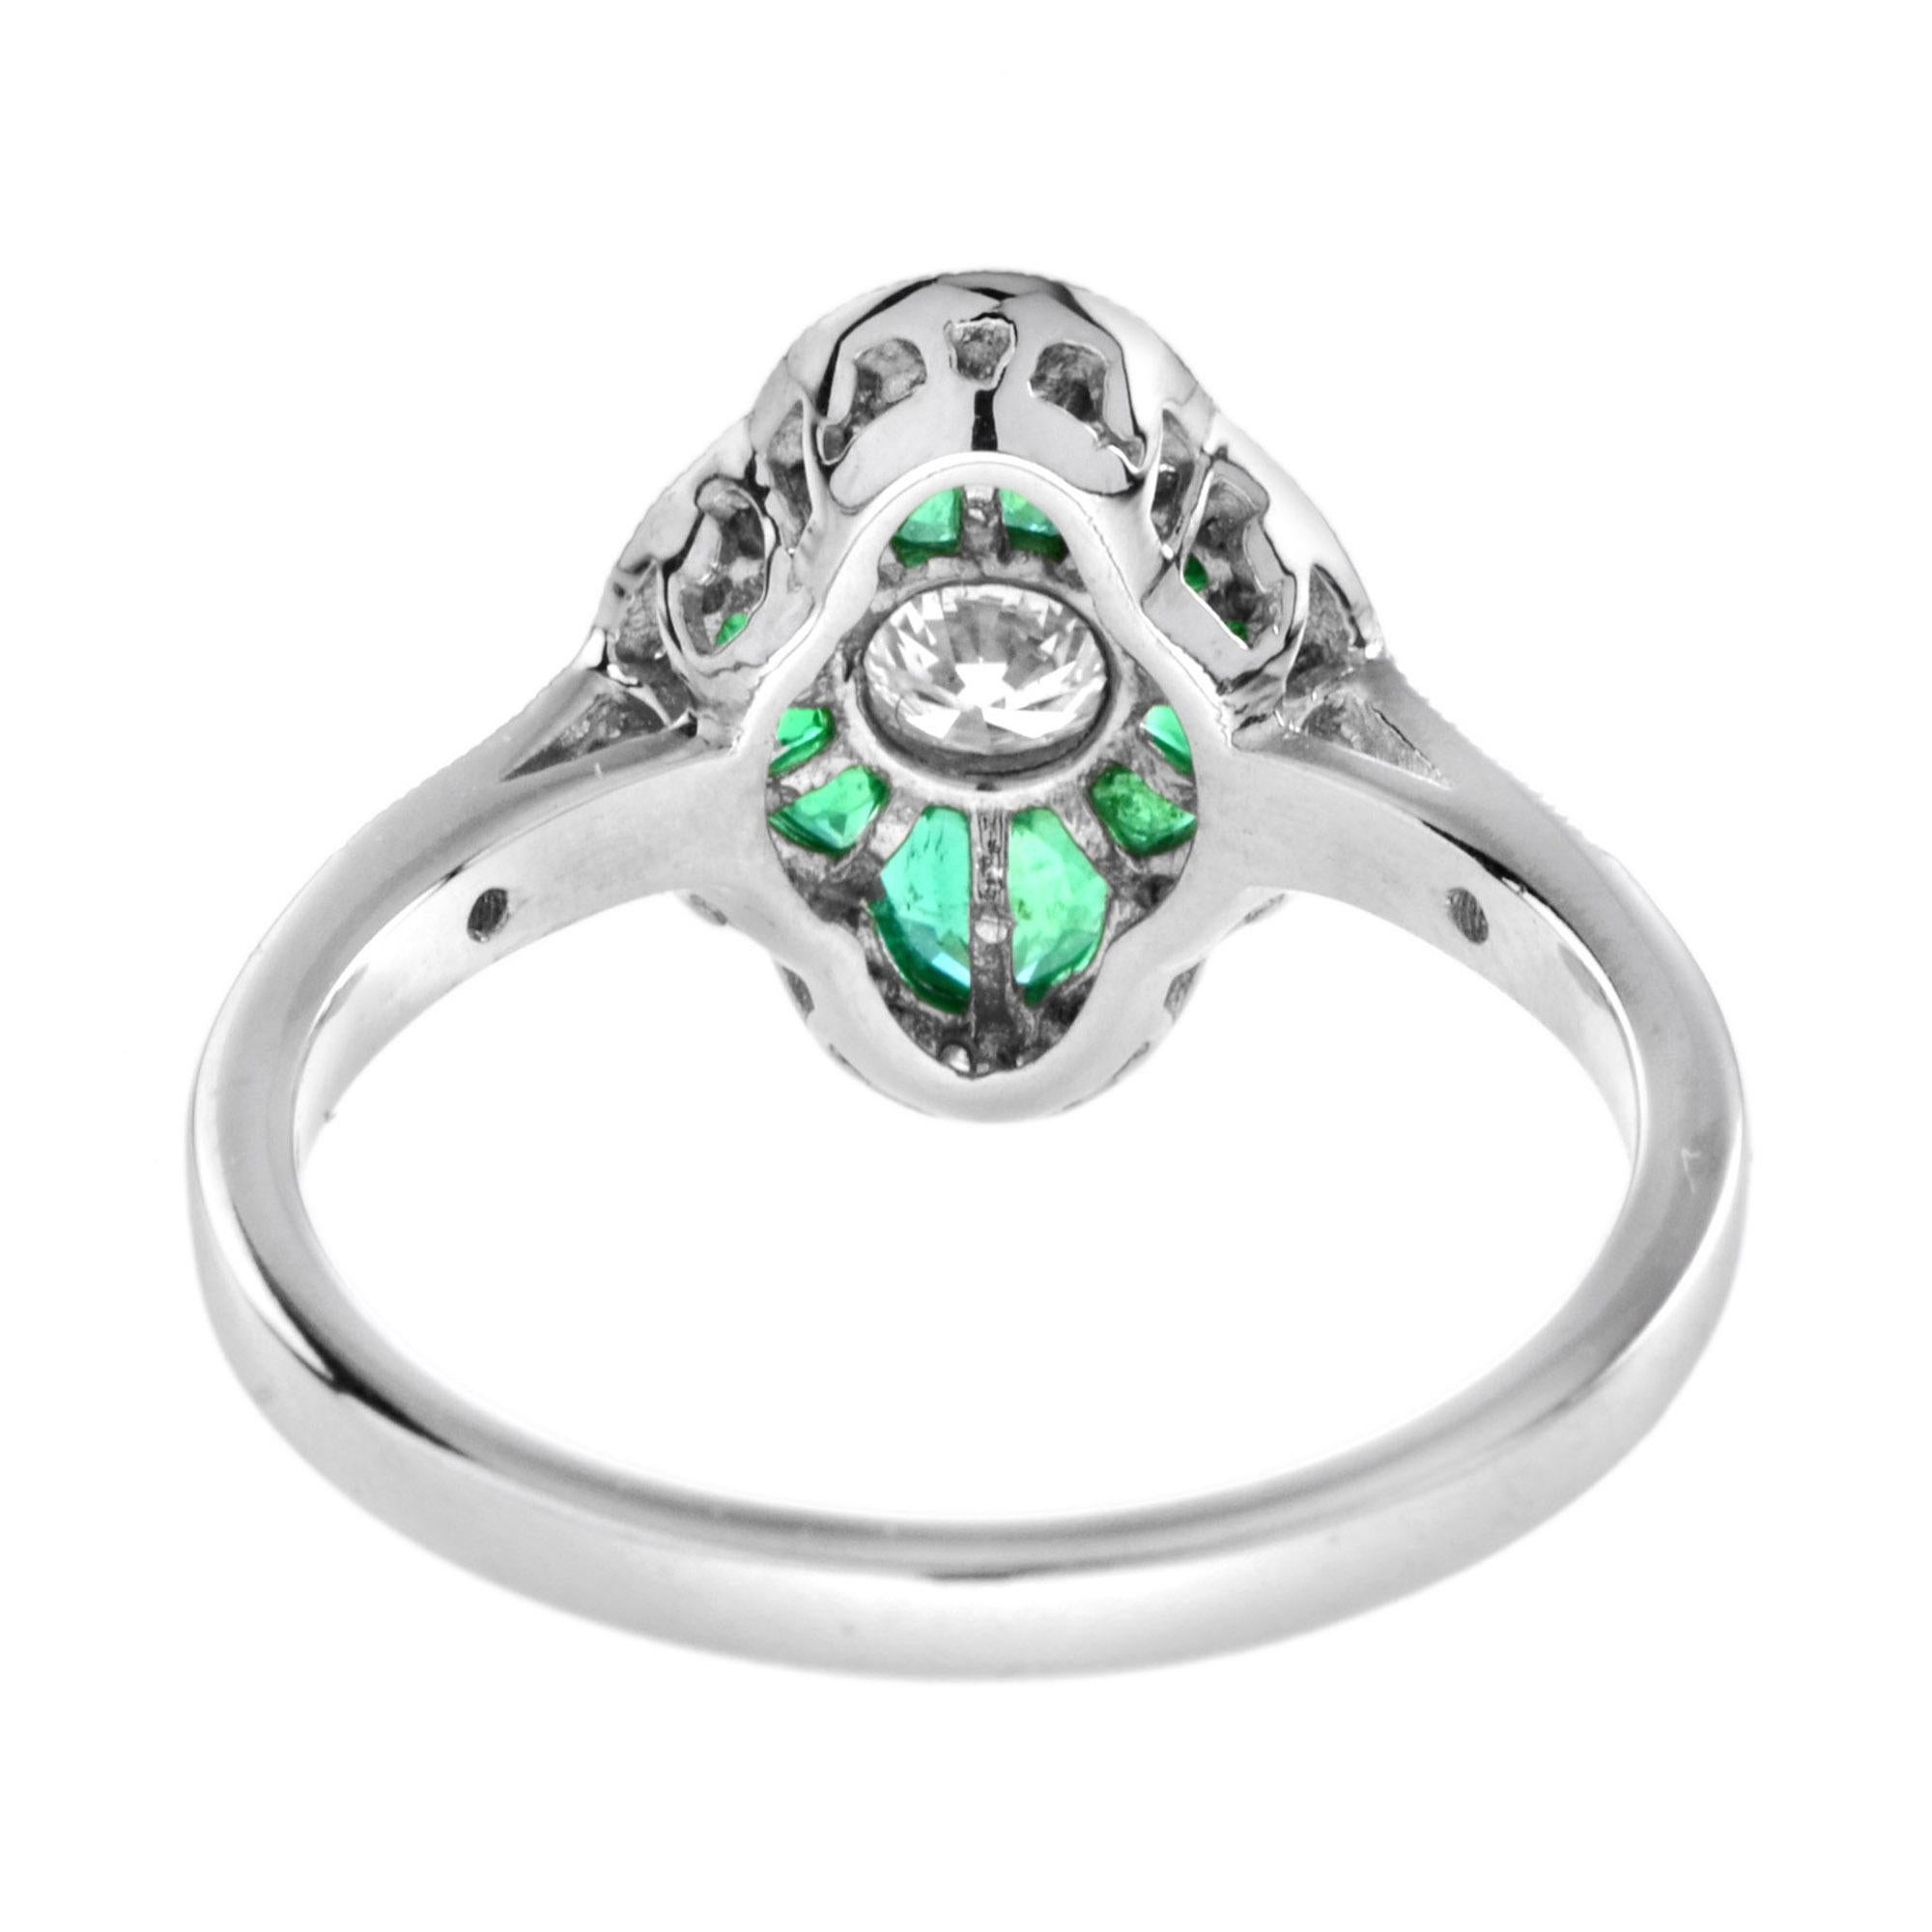 For Sale:  Art Deco Style Diamond and Emerald Engagement Ring in 18K White Gold 5